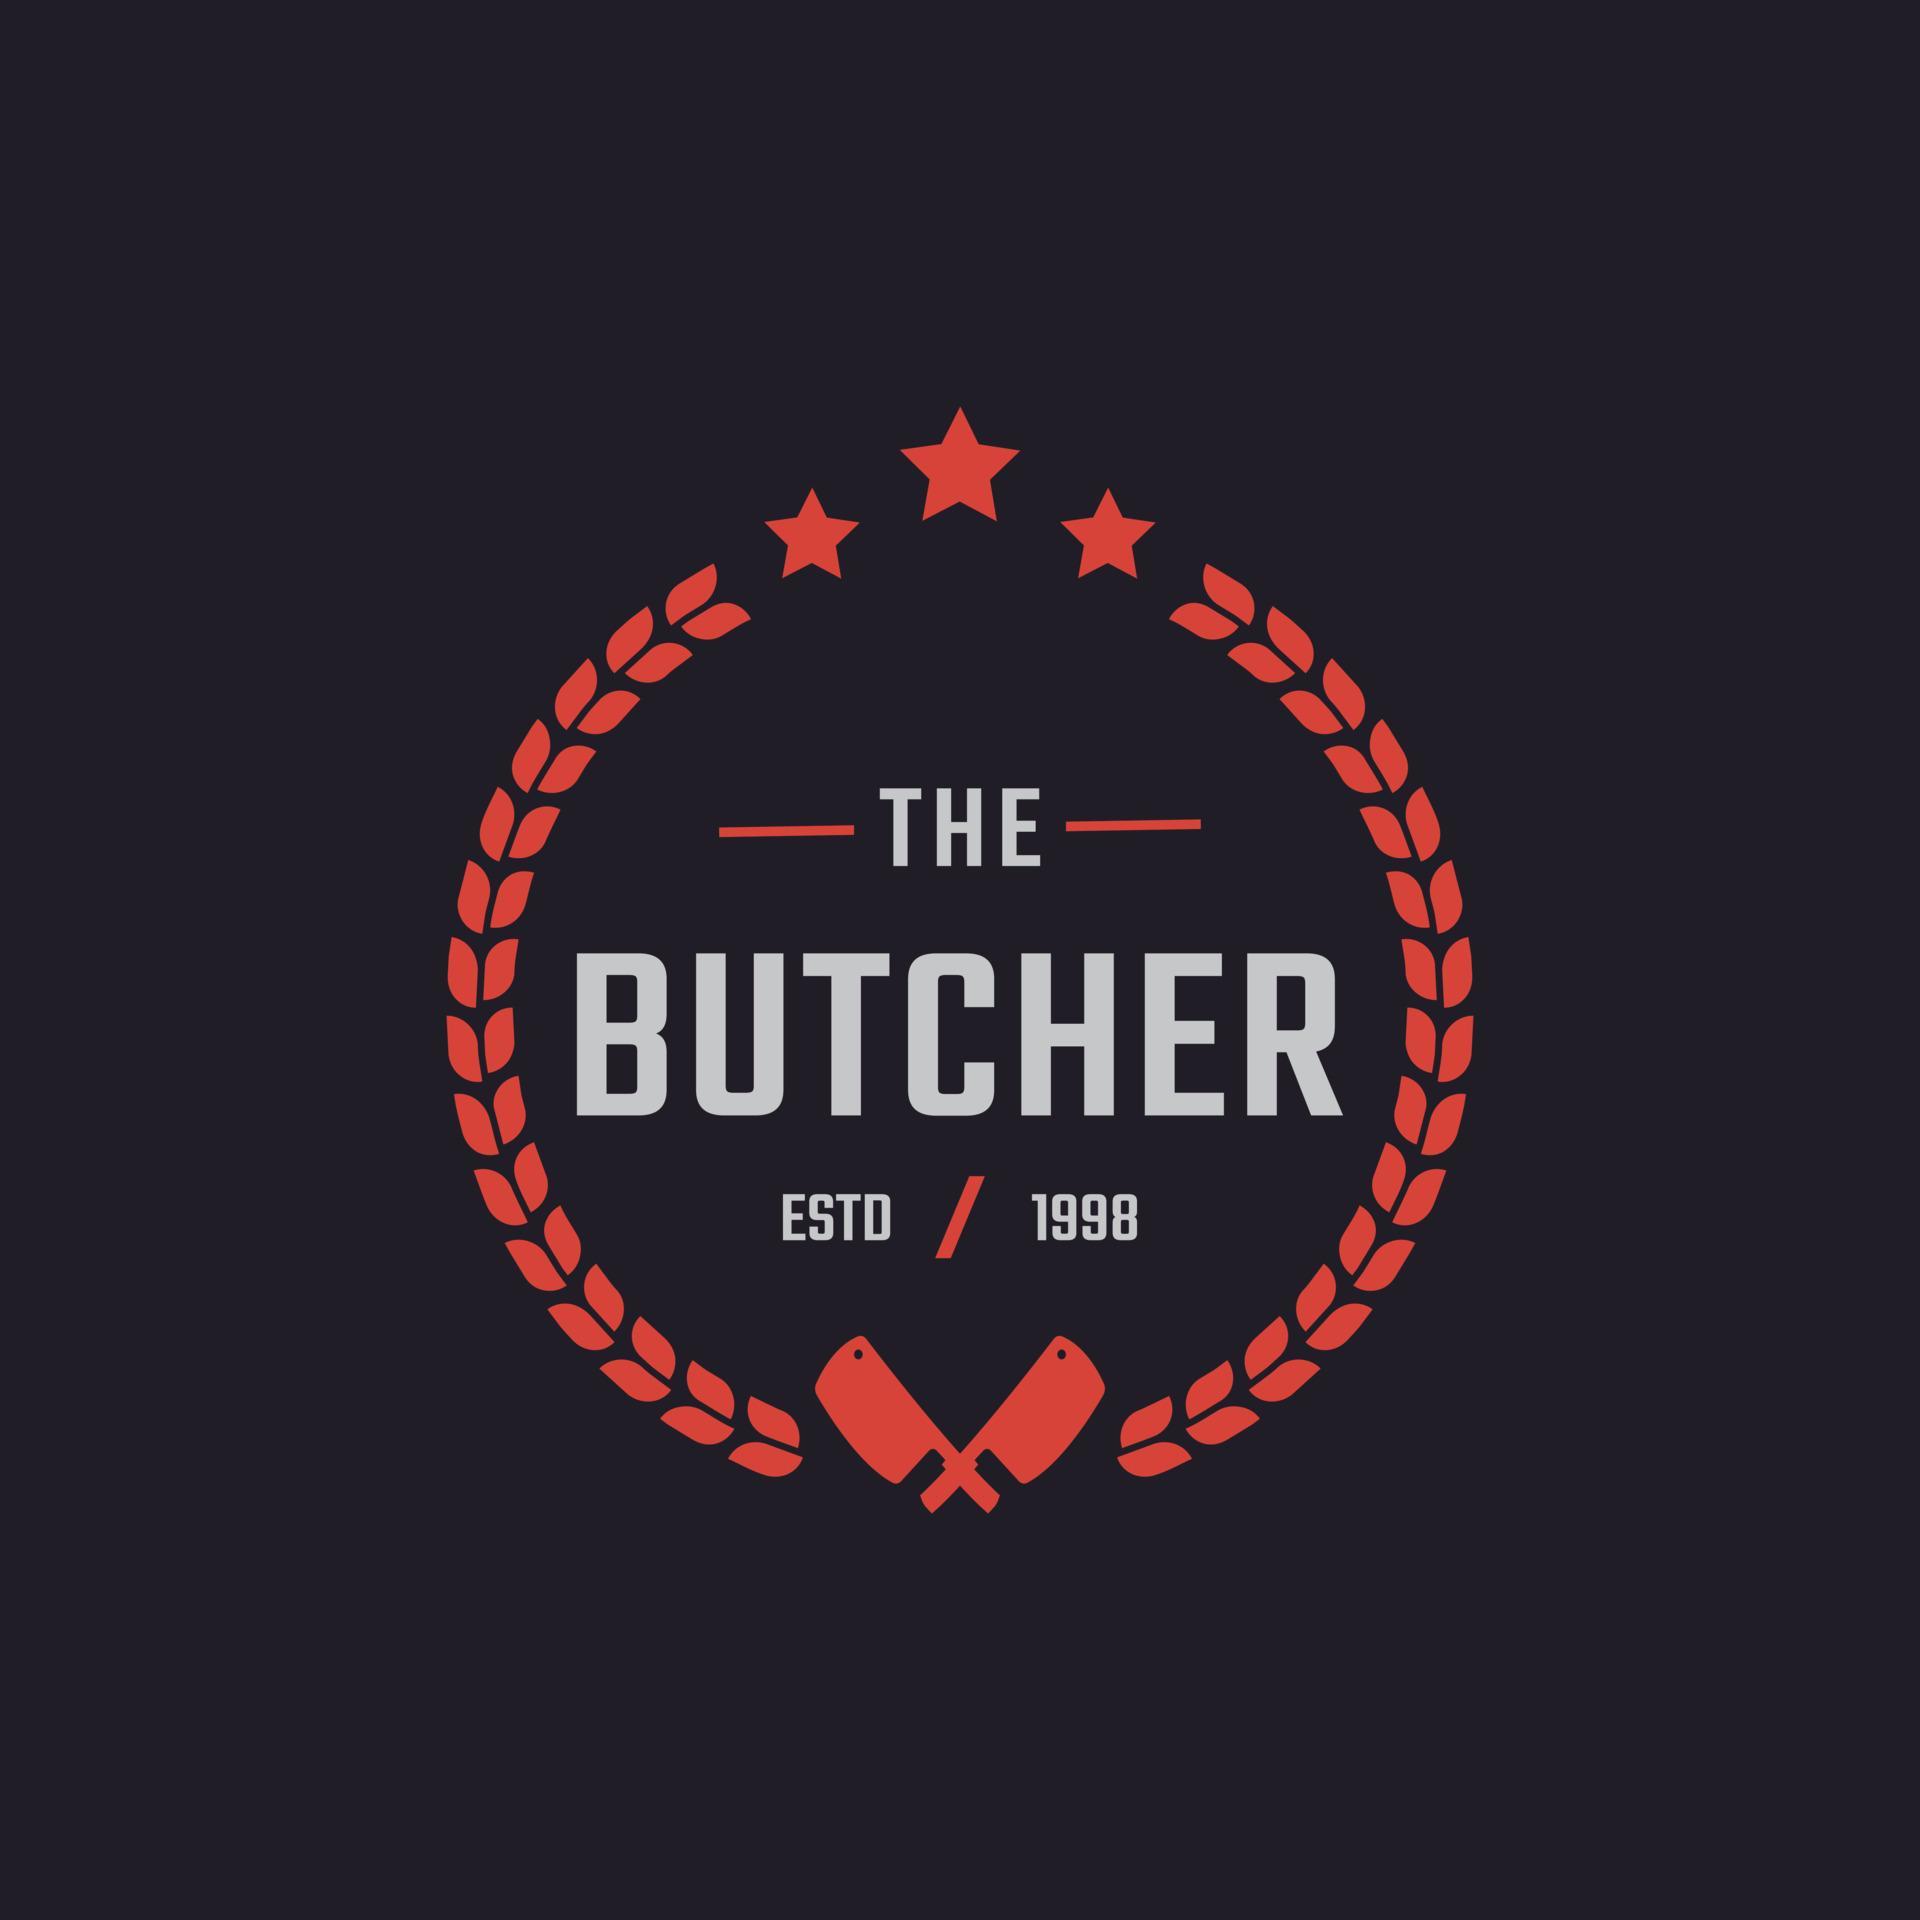 Classic Vintage Retro Label Badge for Butcher Shop with Crossed ...